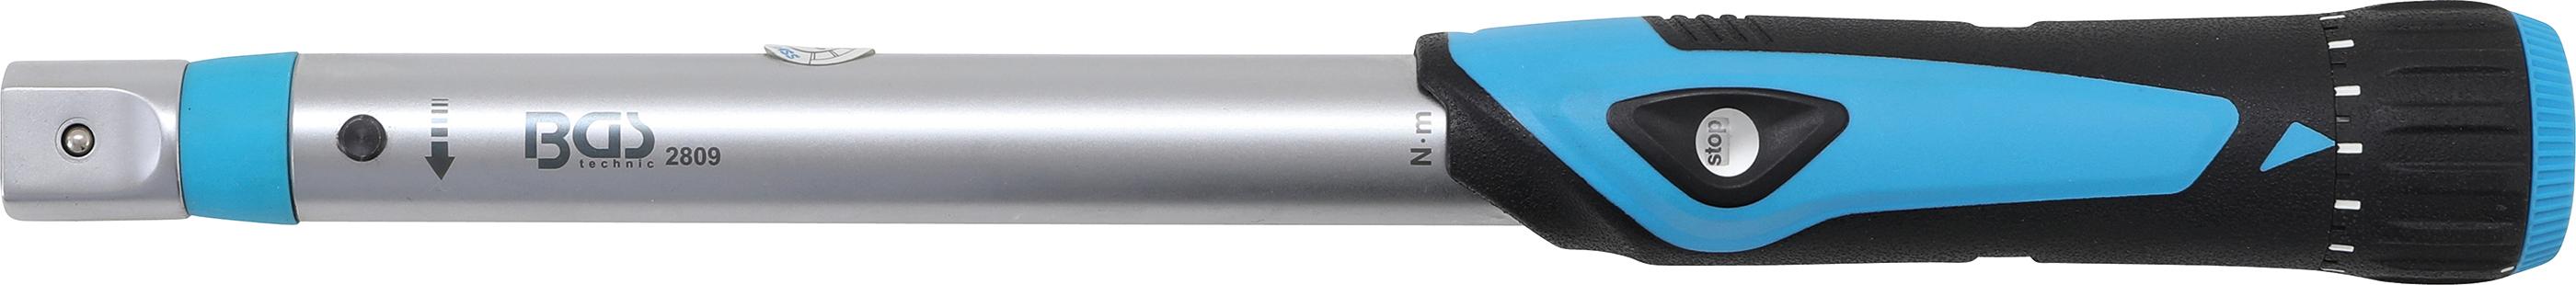 Torque Wrench | 10 - 50 Nm | for 9 x 12 mm Insert Tools (2809)